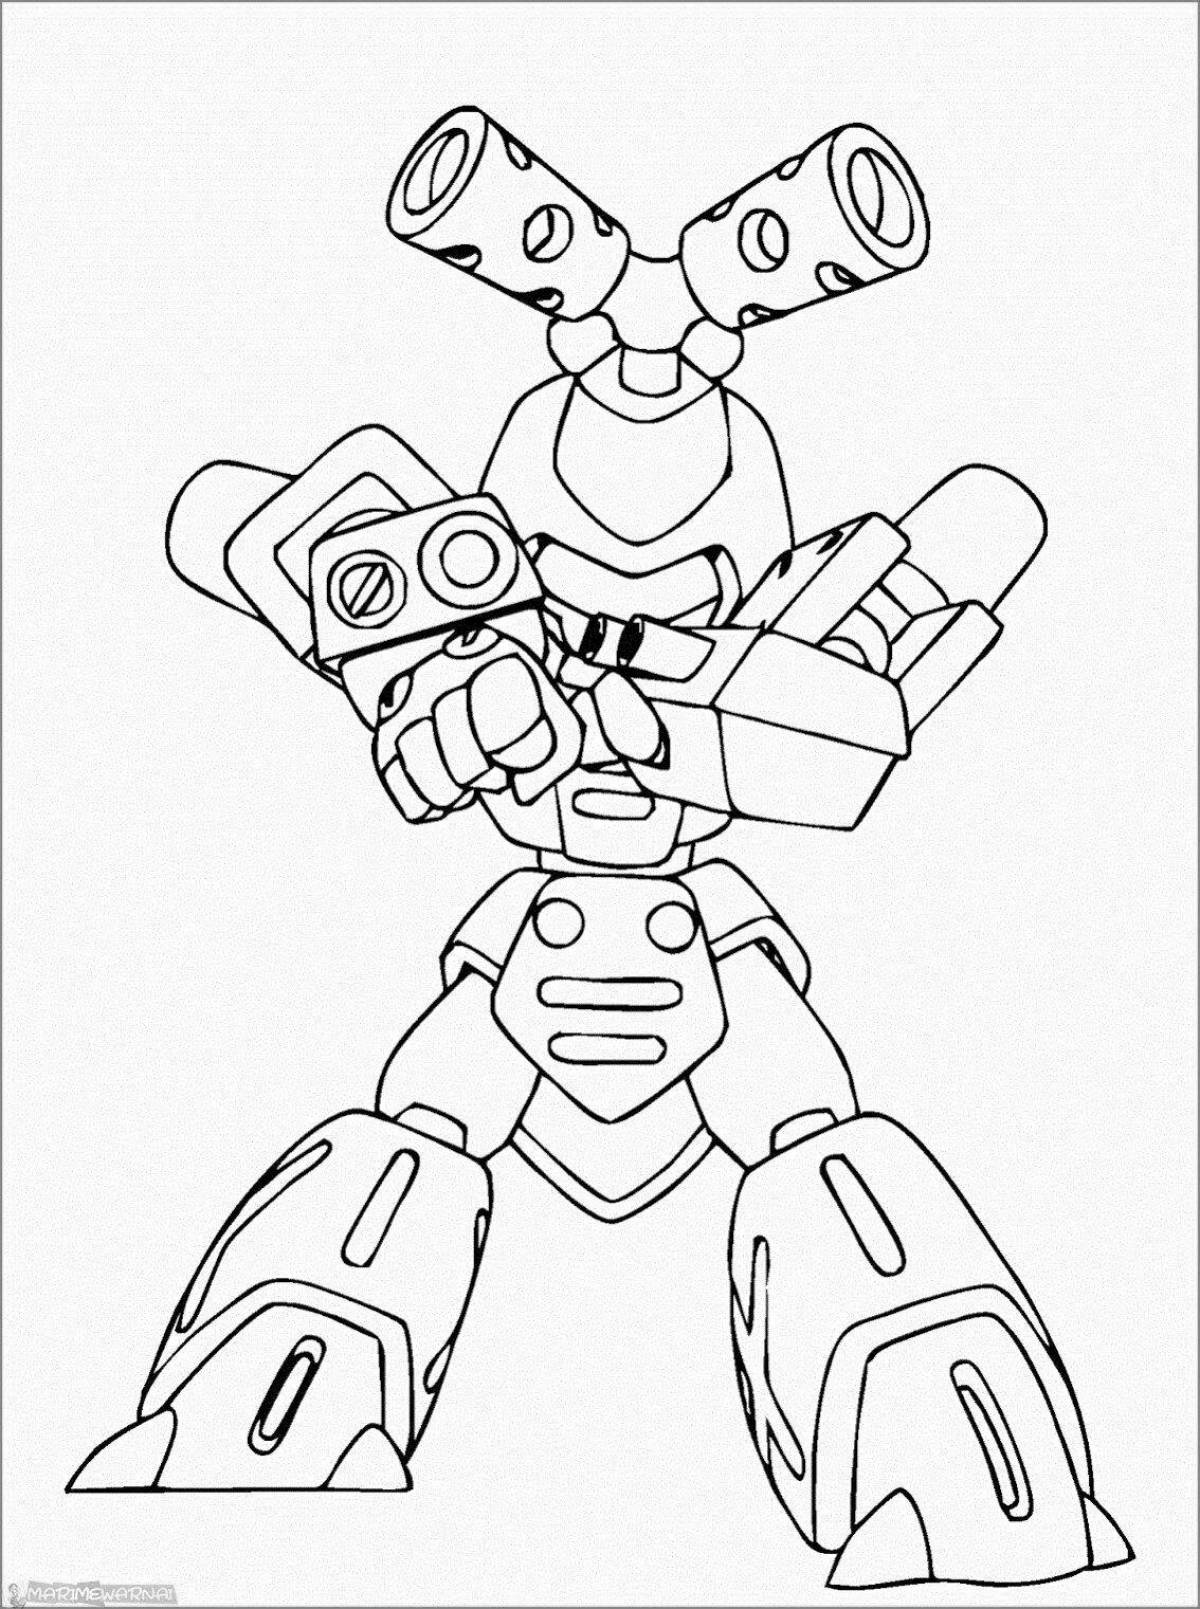 Playful tobot coloring page for kids